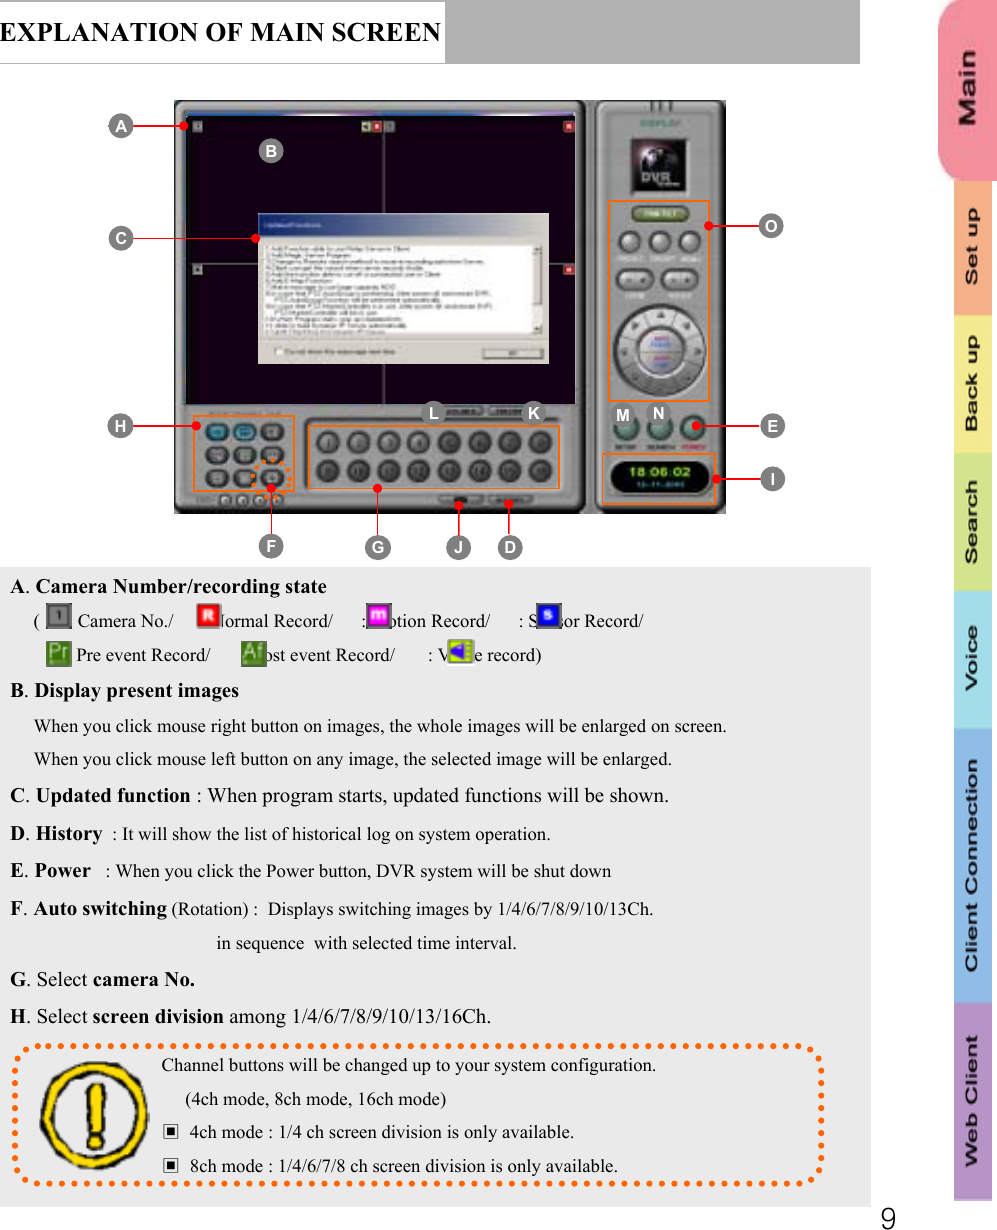 9EXPLANATION OF MAIN SCREENBK NFLMGIAOCH EJ DA. Camera Number/recording state(    : Camera No./      : Normal Record/      : Motion Record/      : Sensor Record/ : Pre event Record/       : Post event Record/       : Voice record)B. Display present imagesWhen you click mouse right button on images, the whole images will be enlarged on screen.When you click mouse left button on any image, the selected image will be enlarged. C. Updated function : When program starts, updated functions will be shown. D. History : It will show the list of historical log on system operation.E. Power : When you click the Power button, DVR system will be shut downFF. . Auto switching (Rotation) :  Displays switching images by 1/4/6/7/8/9/10/13Ch.in sequence  with selected time interval. G. Select camera No.H. Select screen division among 1/4/6/7/8/9/10/13/16Ch. Channel buttons will be changed up to your system configuration.(4ch mode, 8ch mode, 16ch mode)▣4ch mode : 1/4 ch screen division is only available.▣8ch mode : 1/4/6/7/8 ch screen division is only available.